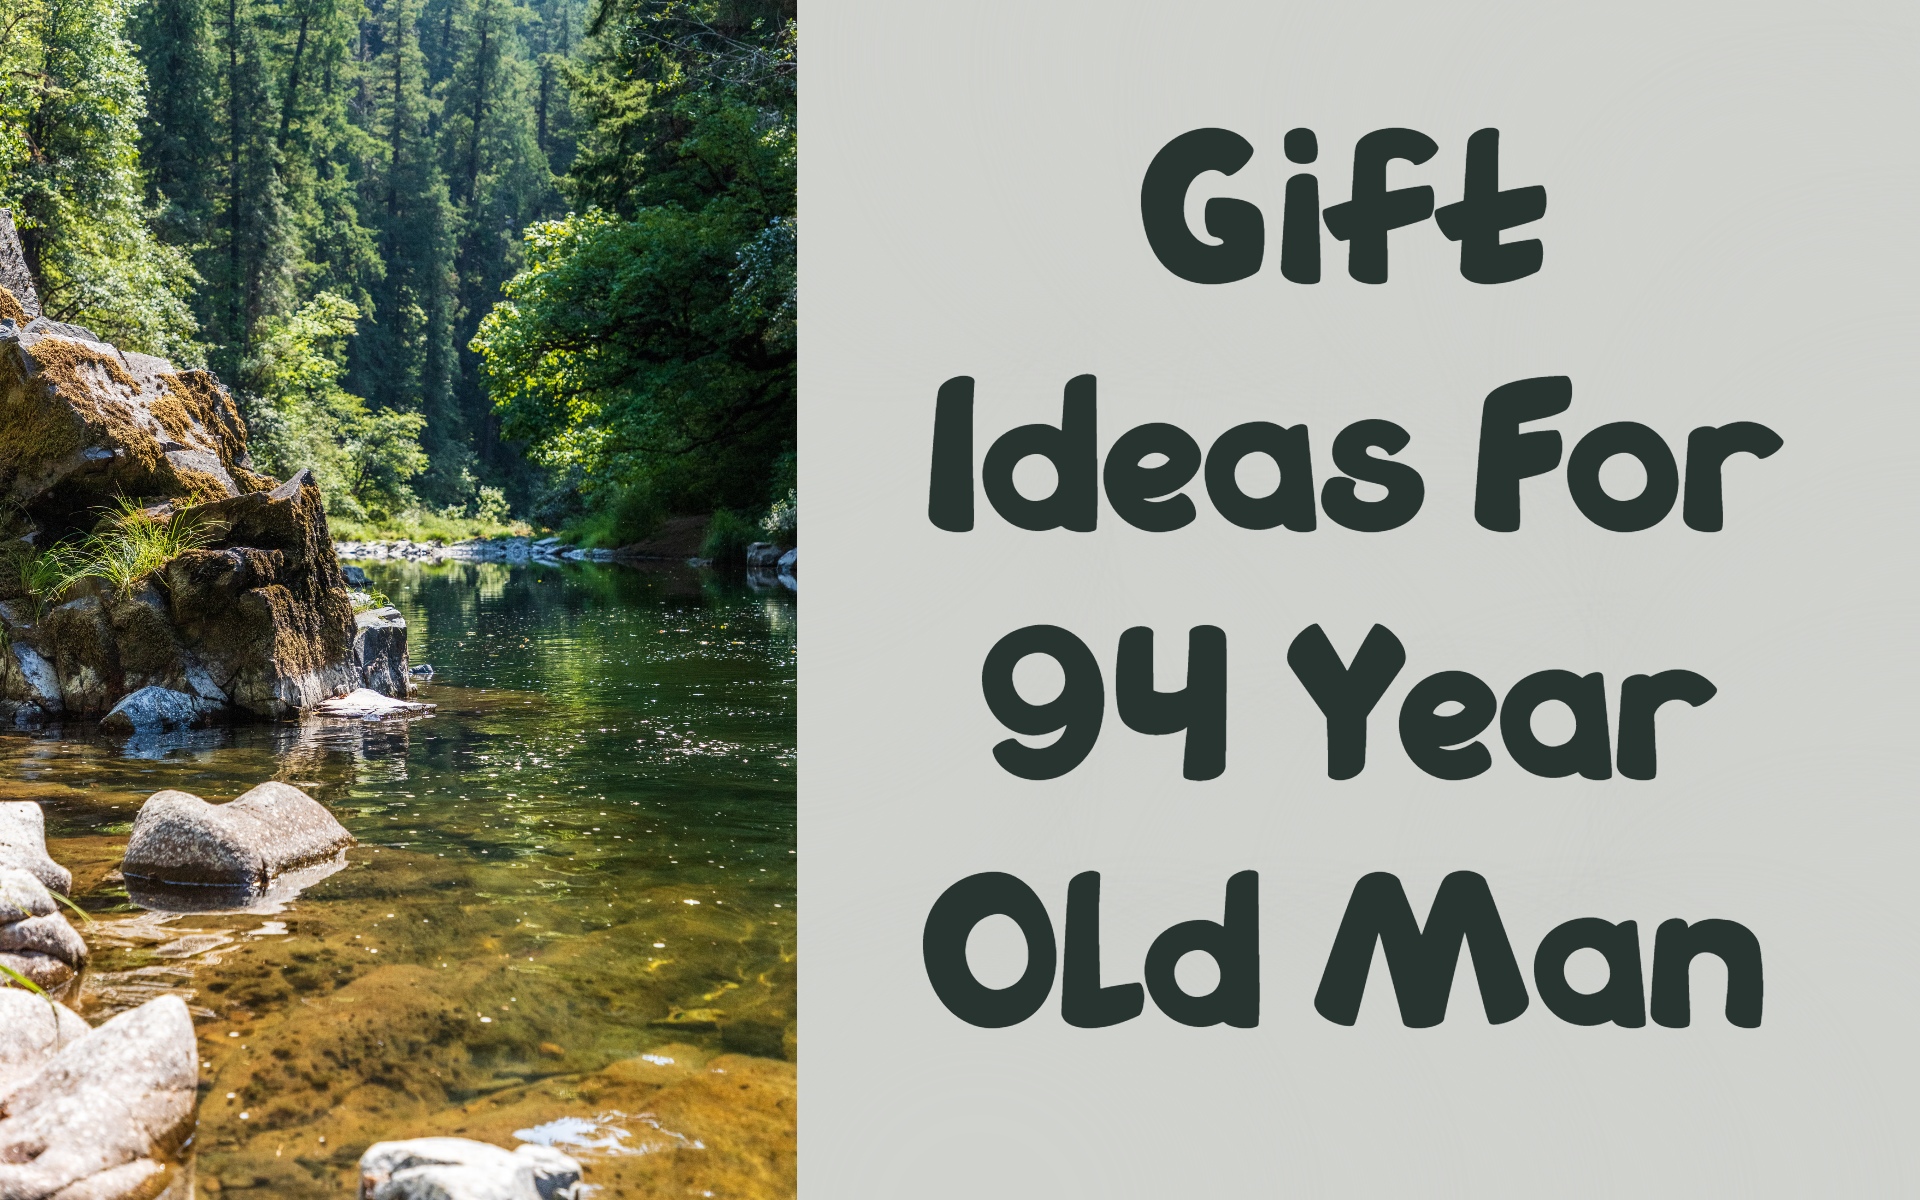 Cover image of gift ideas for 94-year-old man by Giftsedge